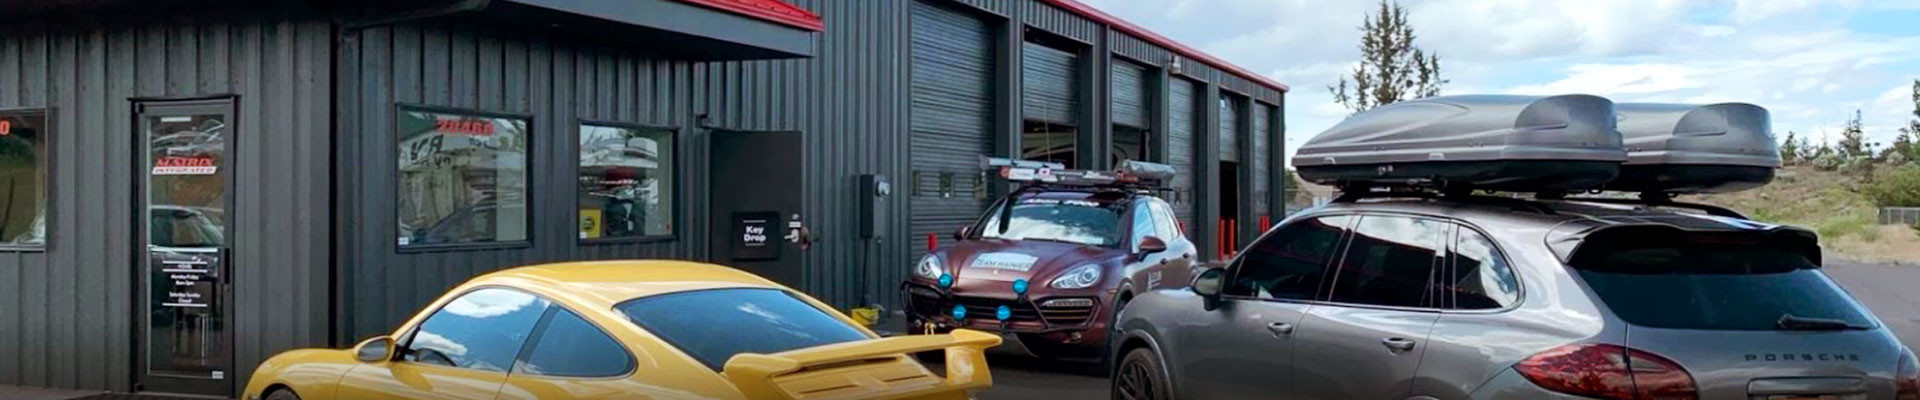 Porsche Repair near Bend, OR by Matrix Integrated a leading Porsche repair shop in Oregon specializing in Porsche repair, maintenance, performance tuning and service